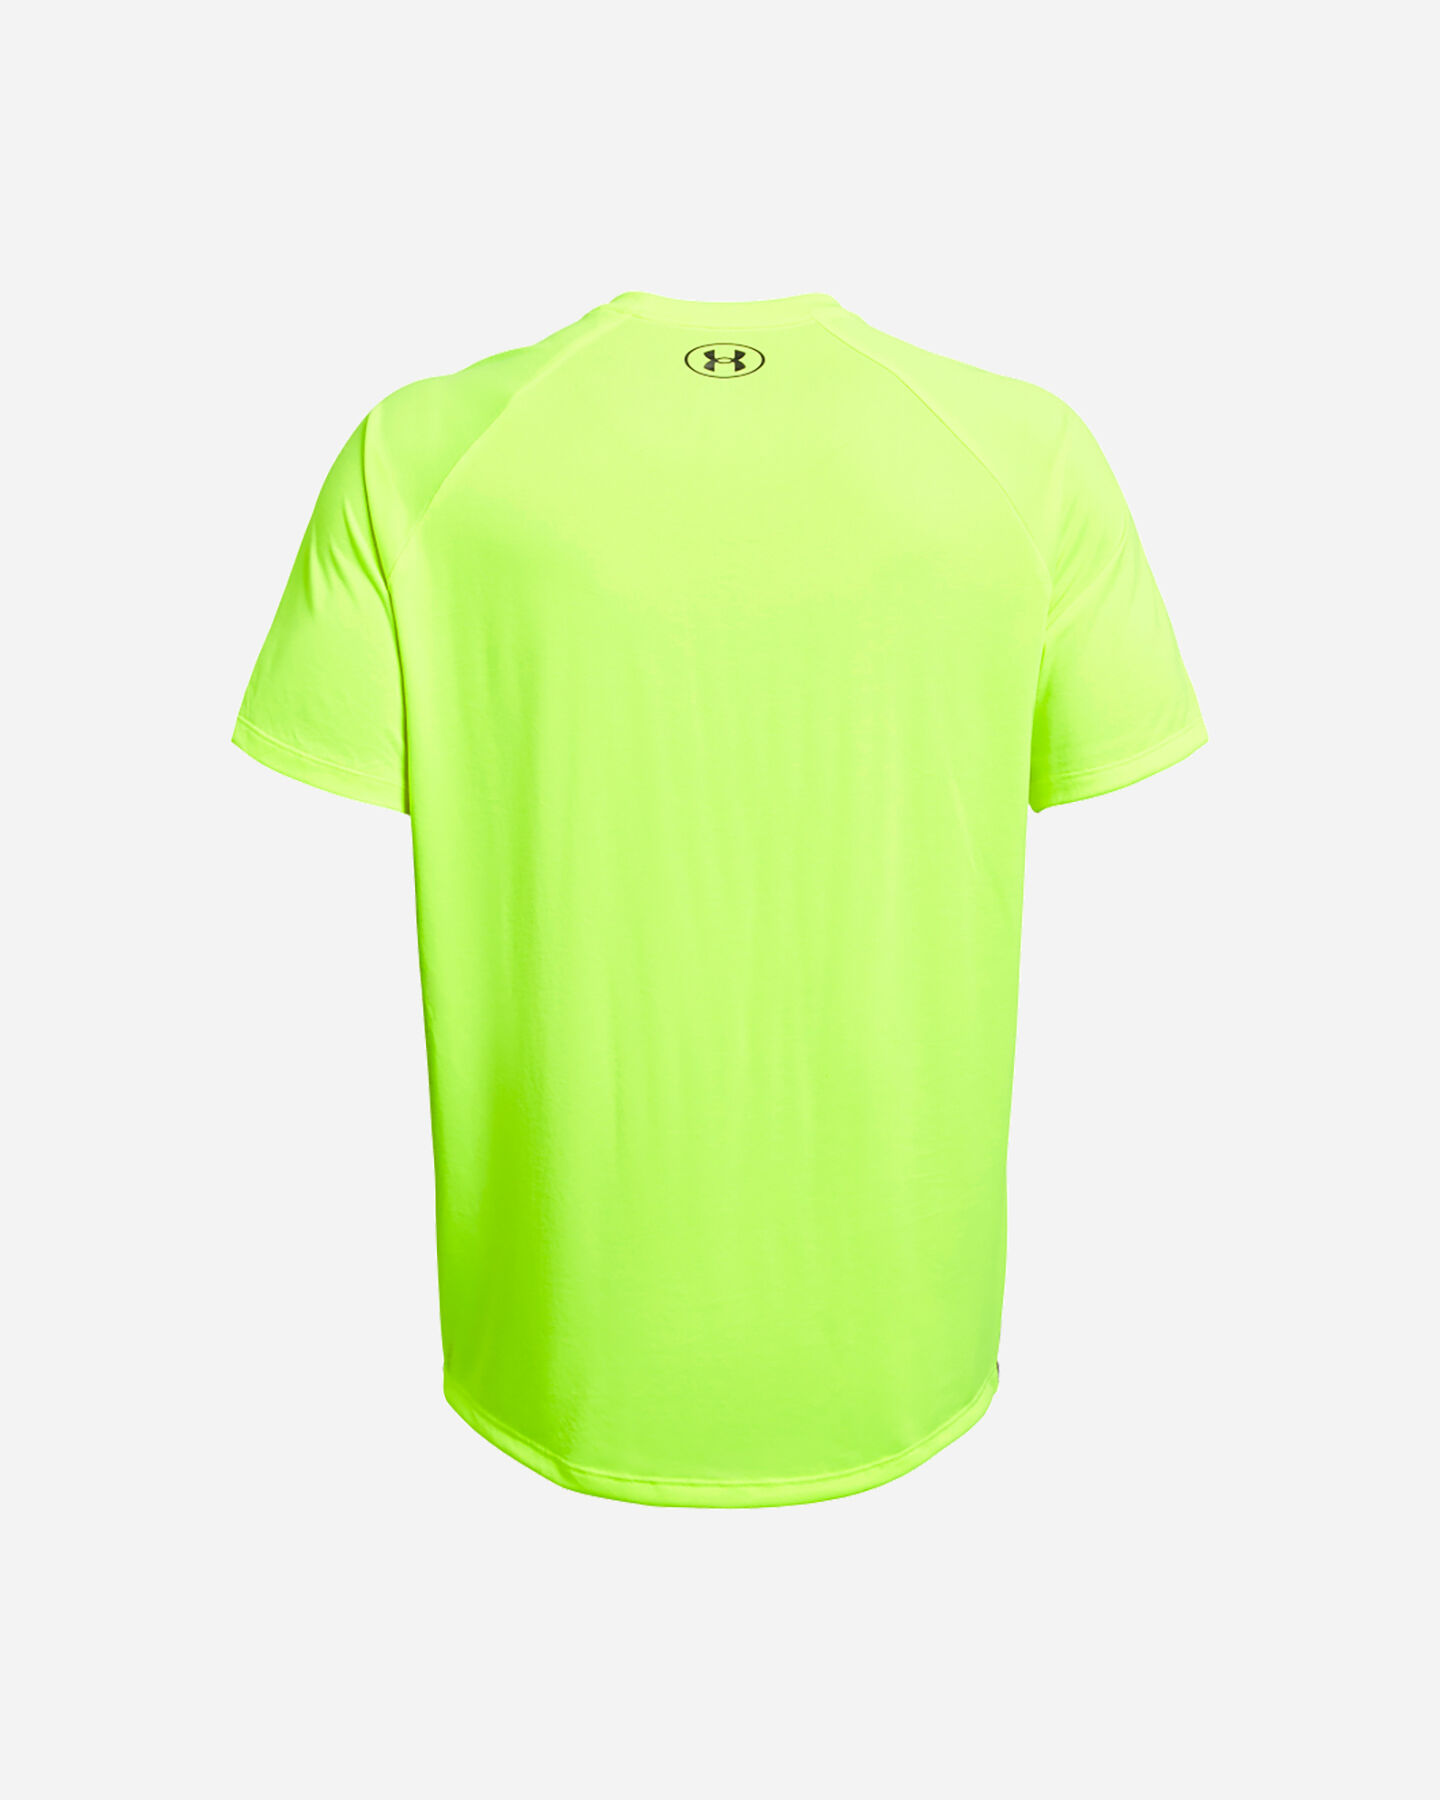  T-Shirt training UNDER ARMOUR TECH FADE M S5641118|0731|SM scatto 1